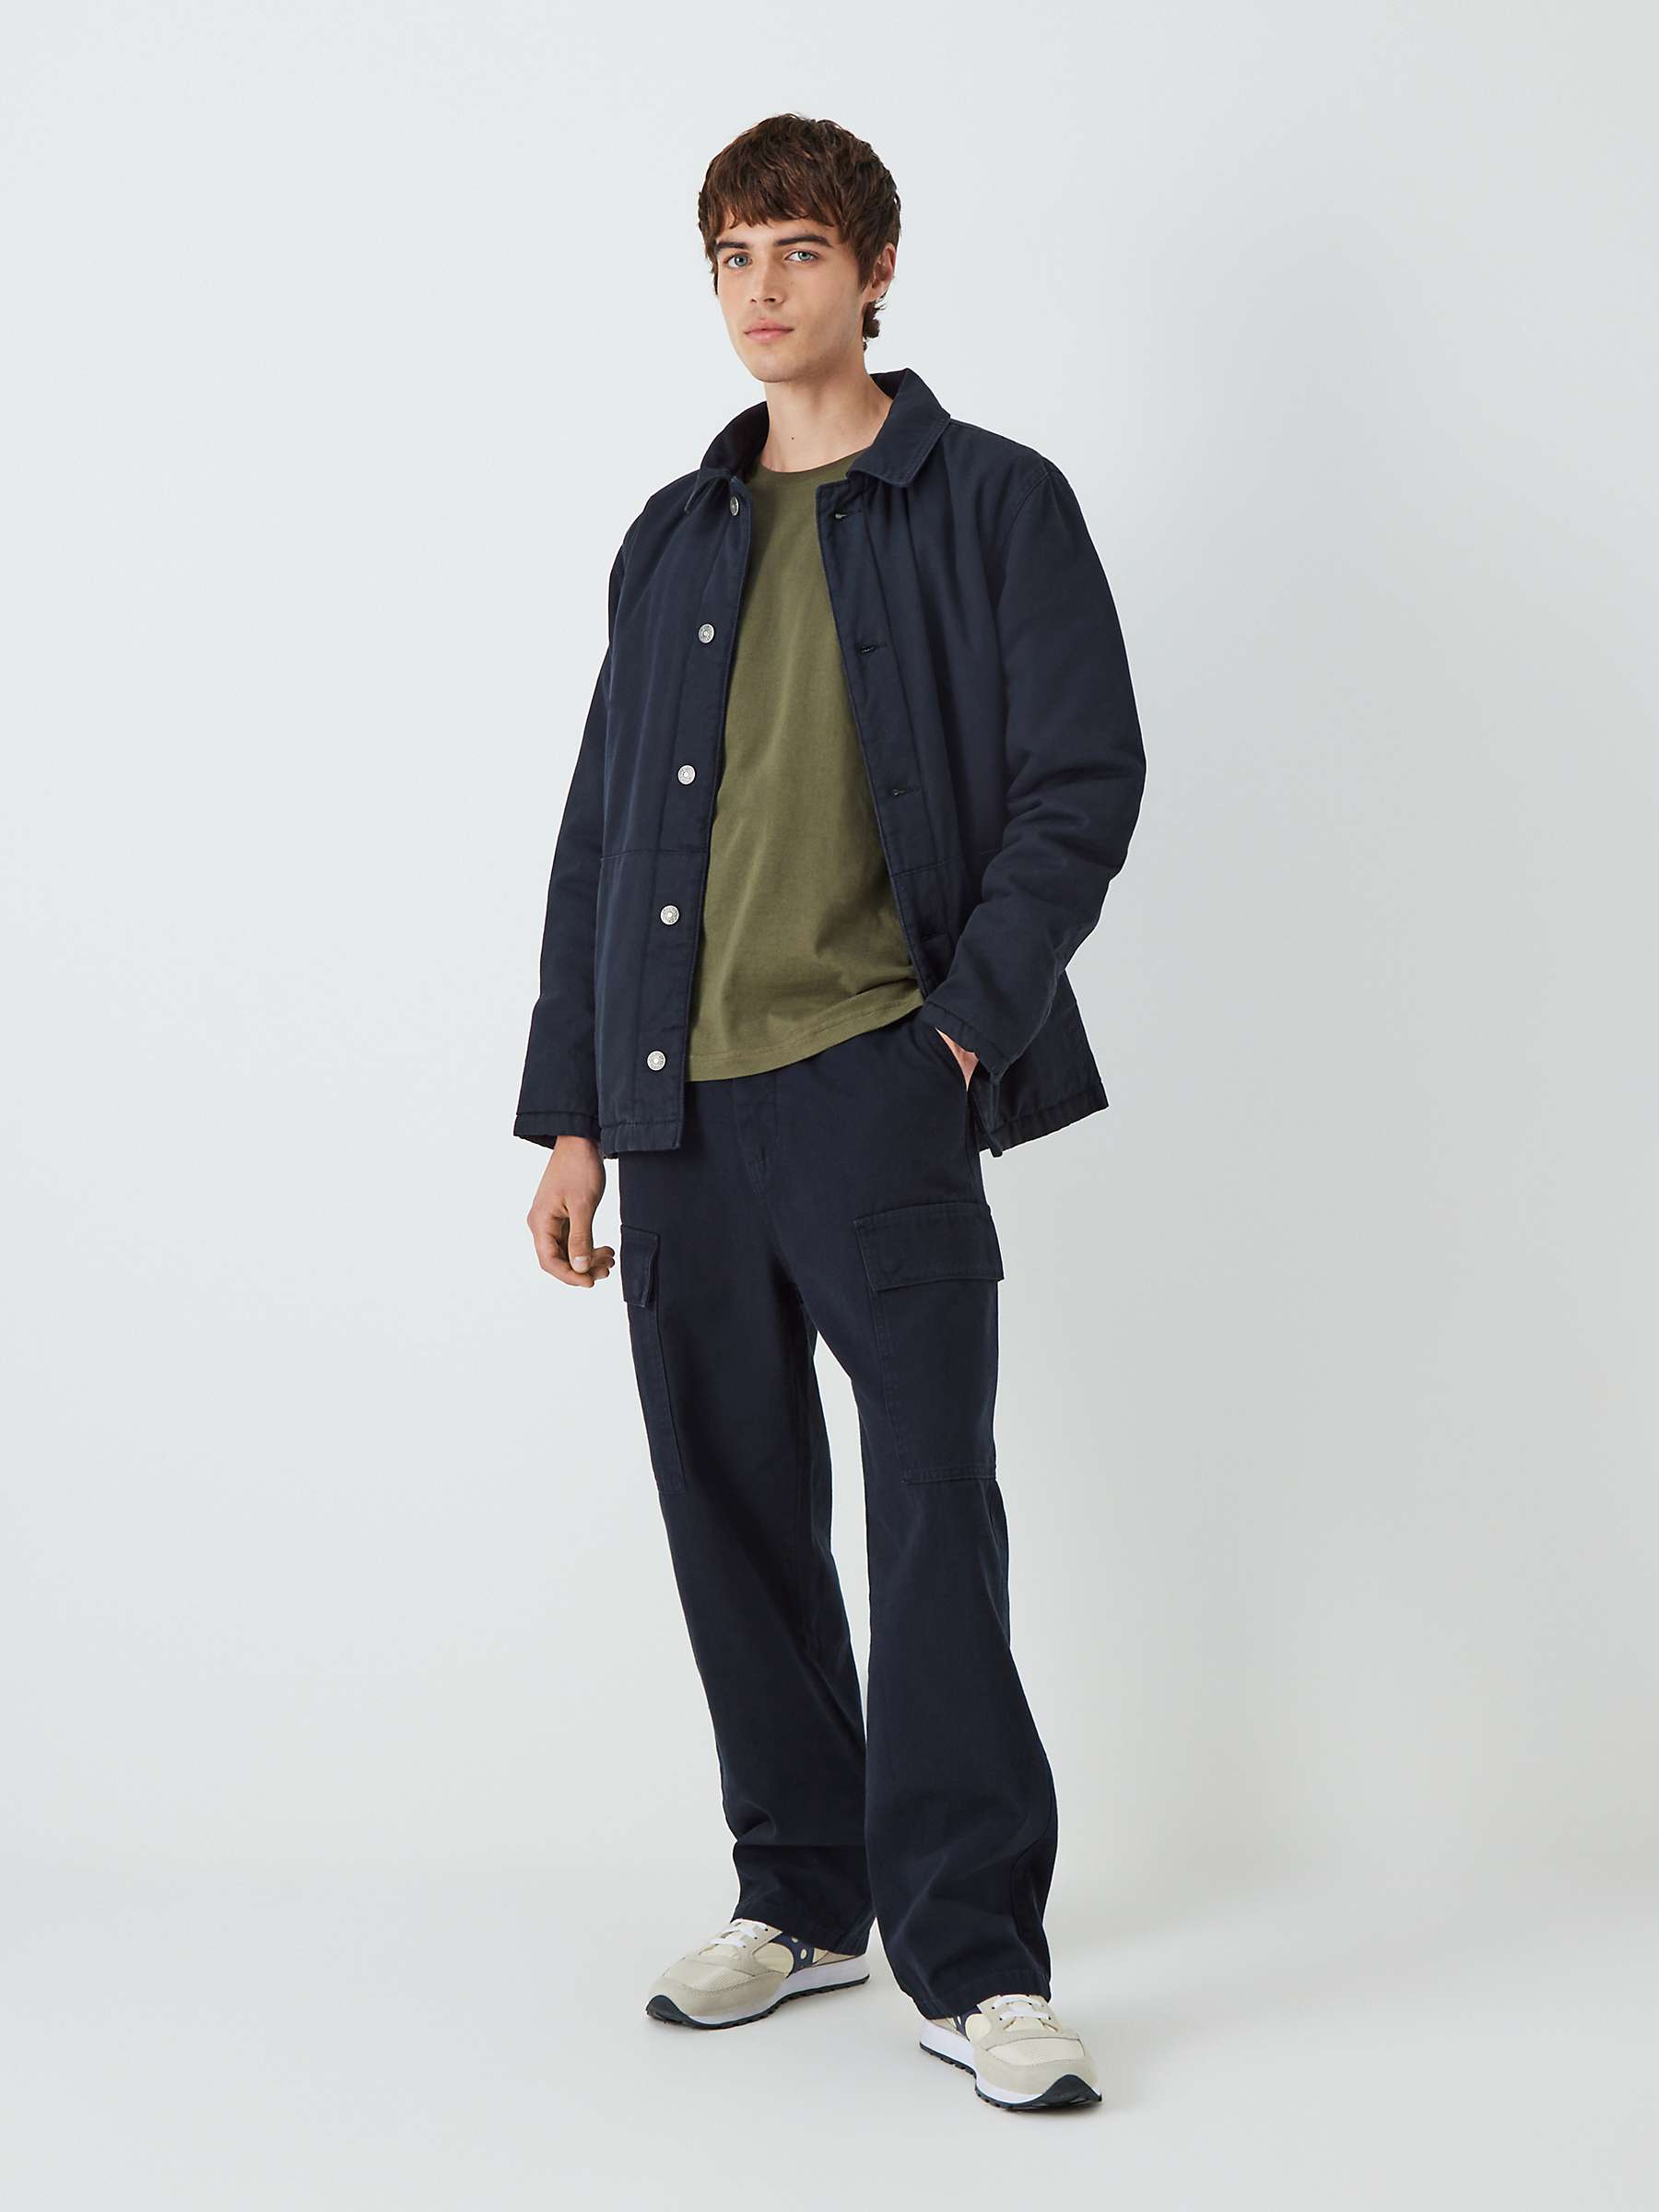 Armor Lux Heritage Pantalon Canvas Trousers, Navy at John Lewis & Partners